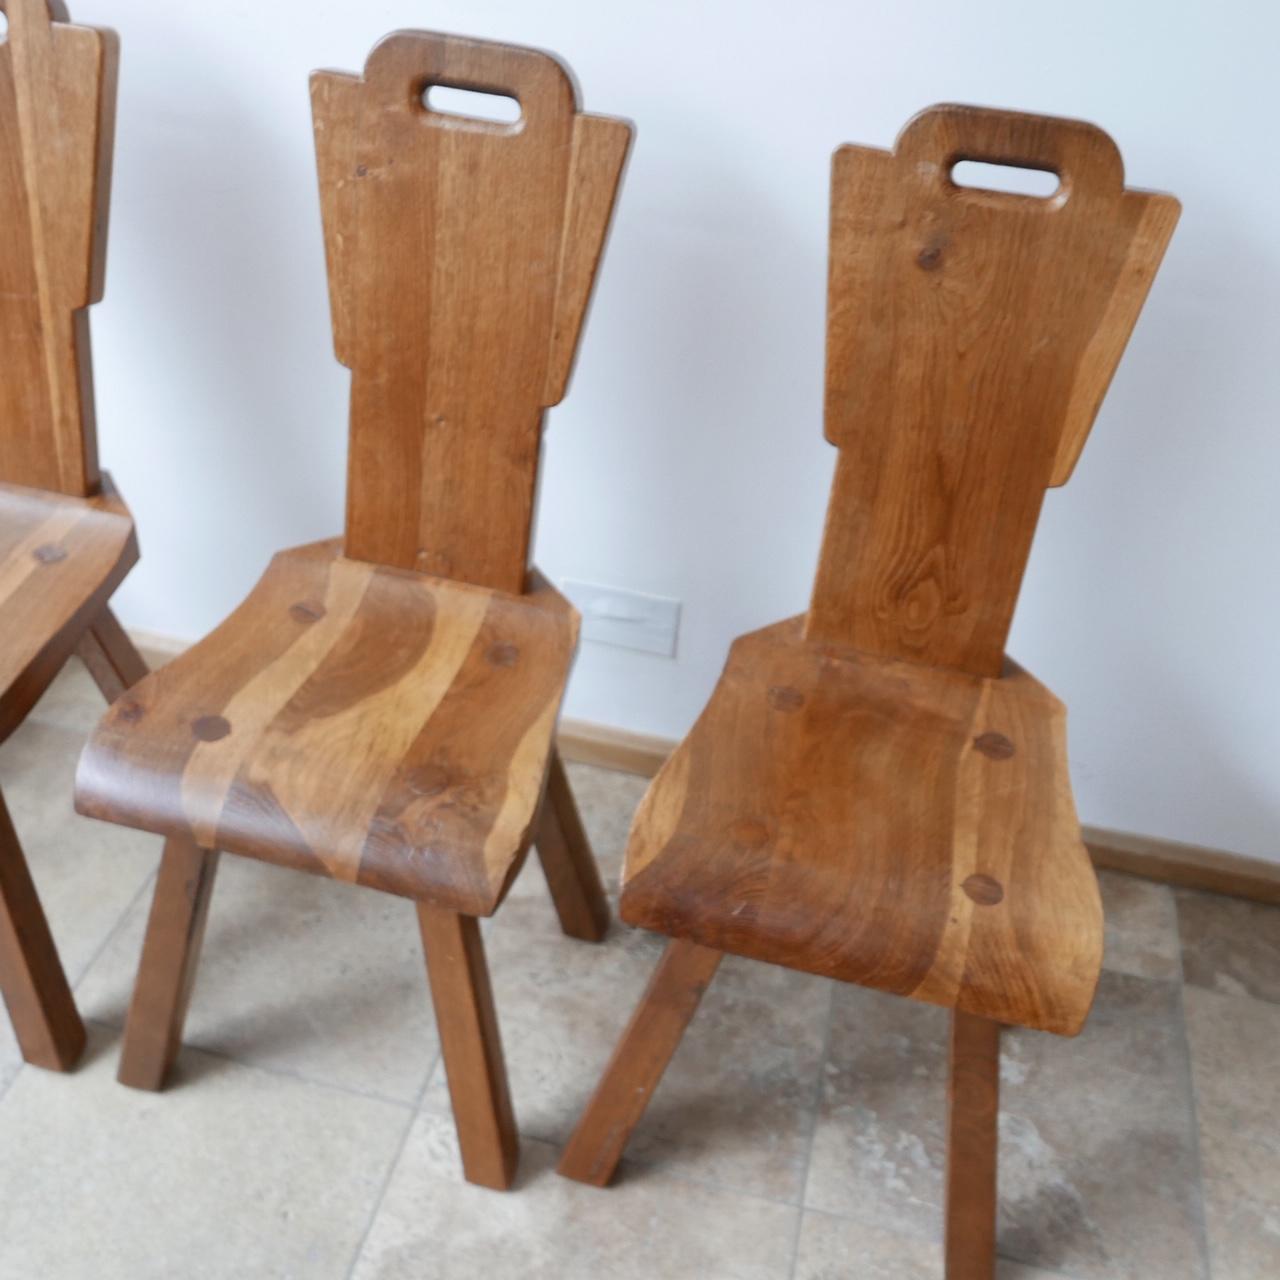 A set of mid-century brutalist dining chairs. 

Belgium, c1970s. 

Solid wood, likely oak. 

Well formed and crafted. 

Price is for the set. 

Dimensions: 38.5 W x 50 D x 45 Seat Height x 94 Total Height in cm.

Delivery: POA

Viewing